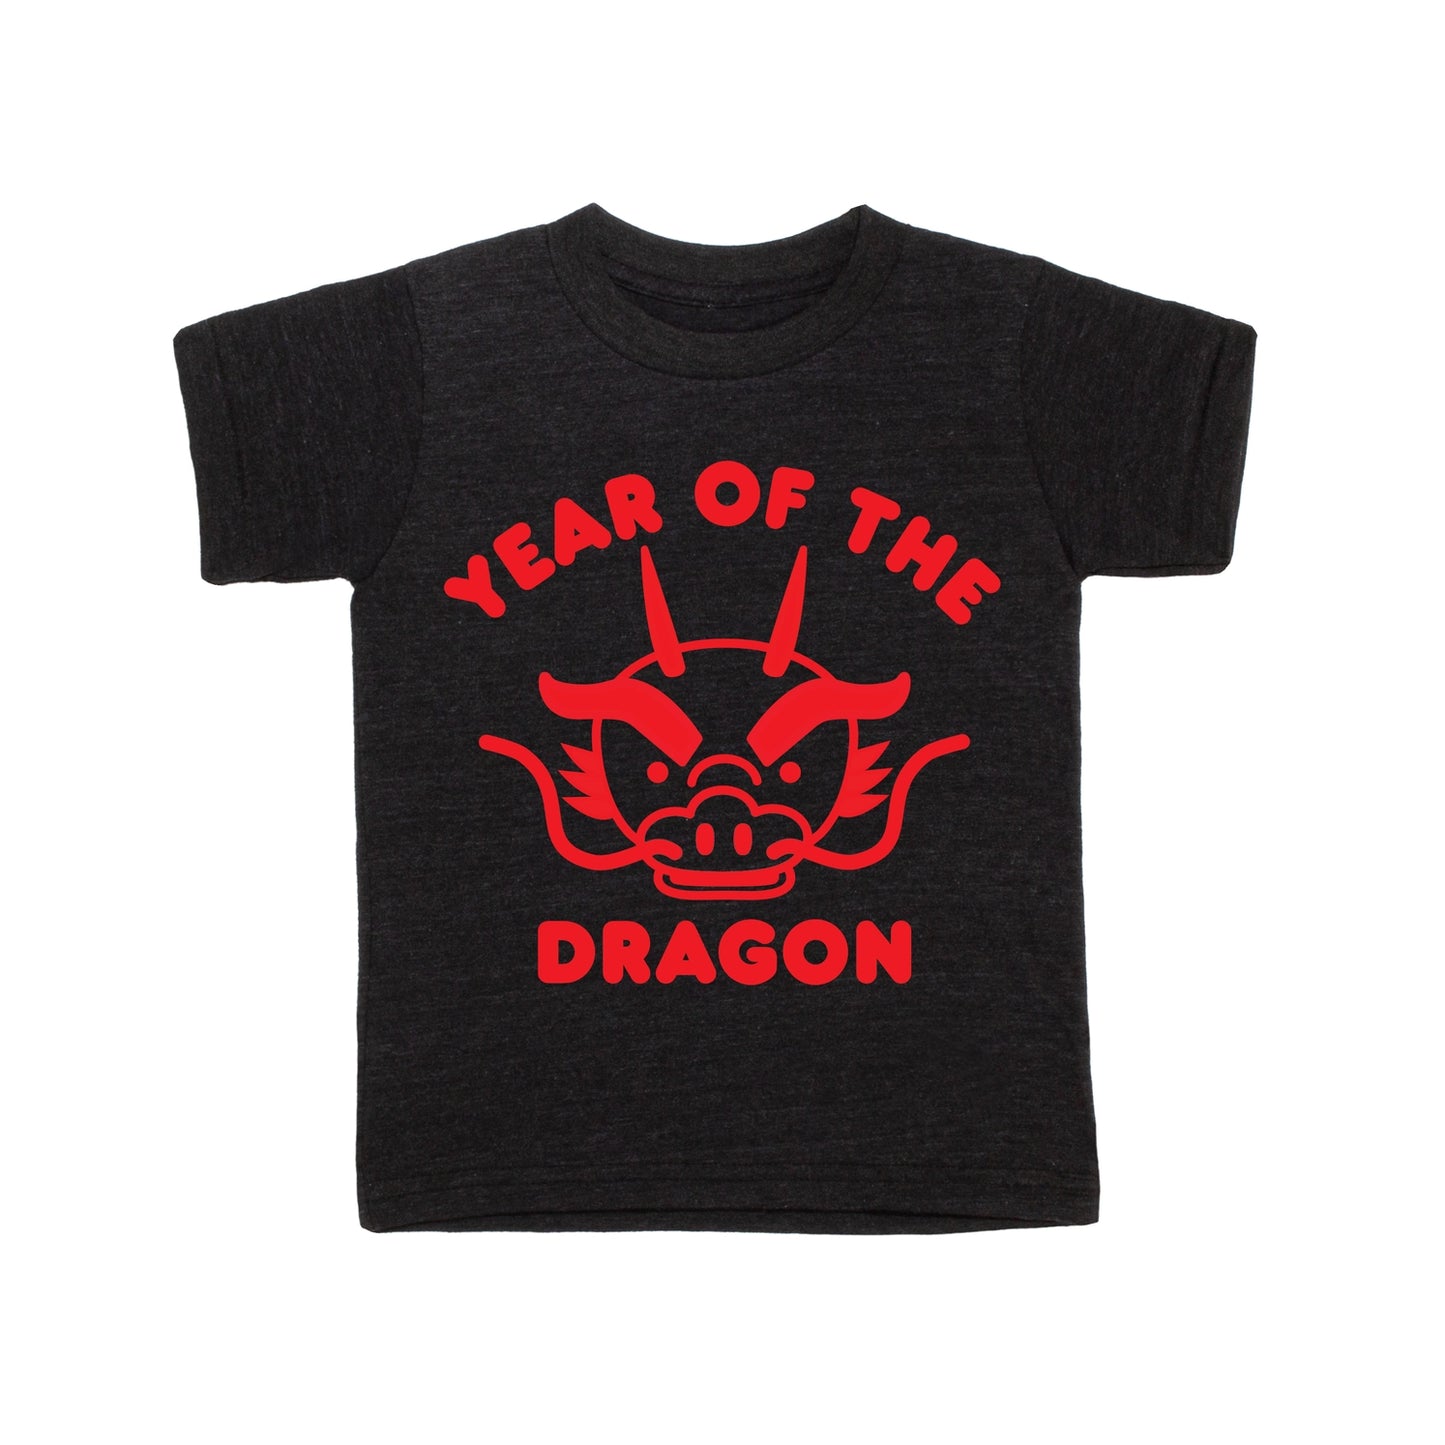 Year of the Dragon Tee by Mochi Kids